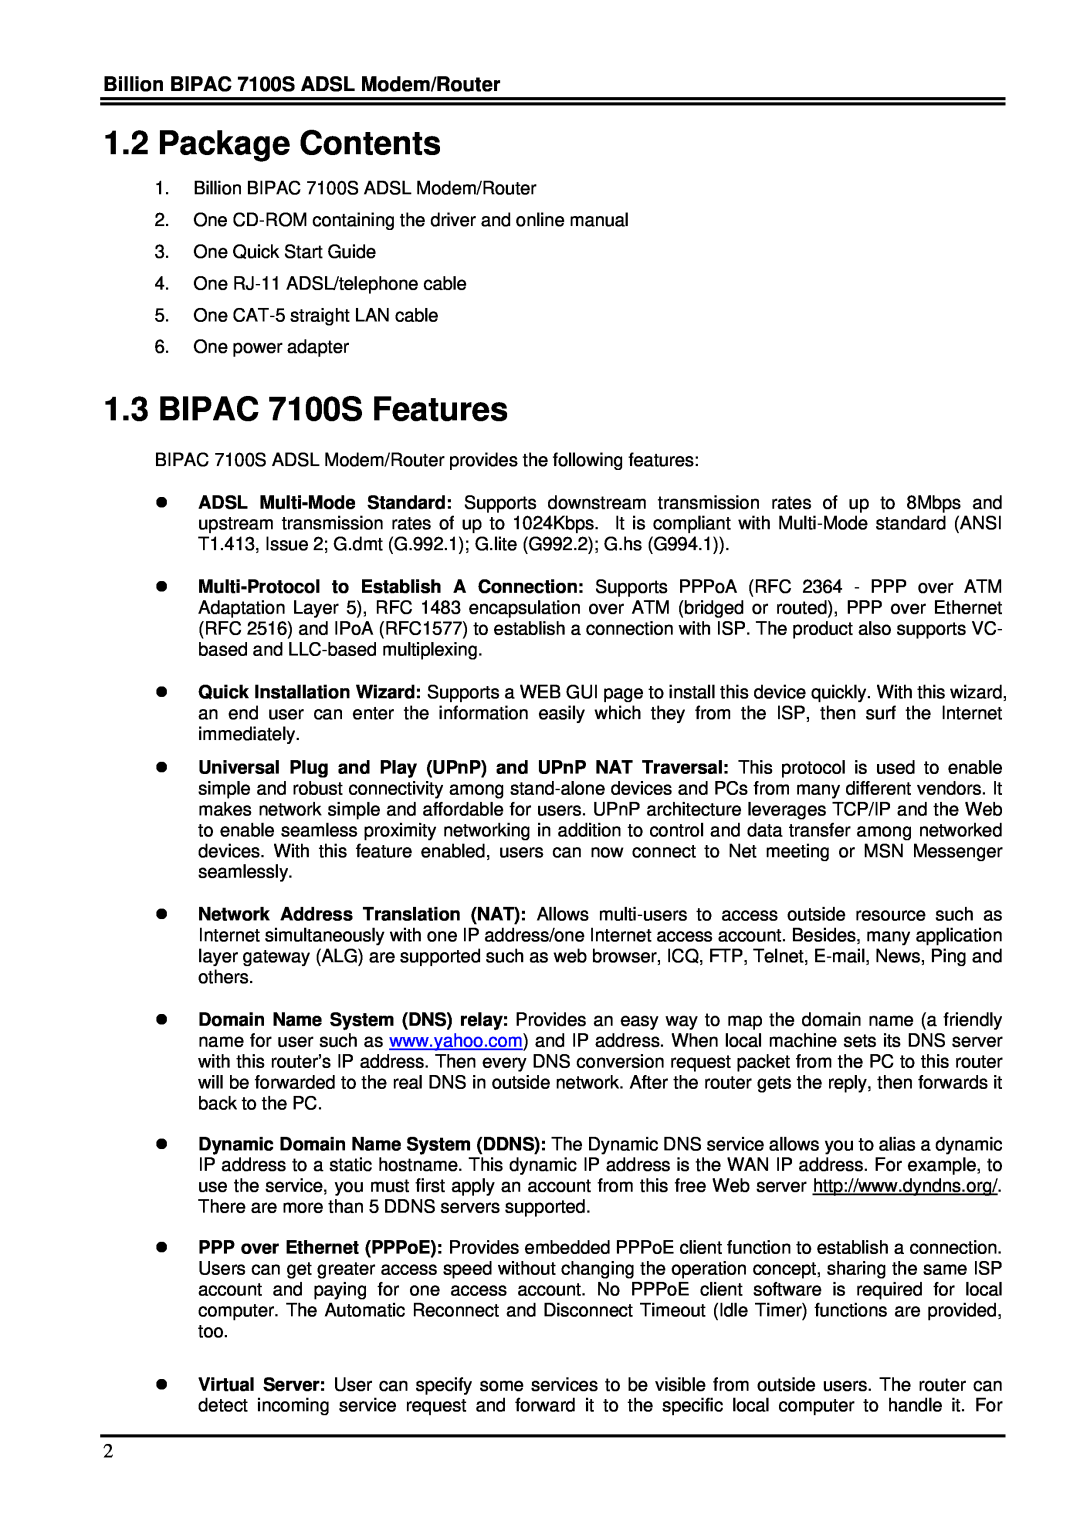 Billion Electric Company user manual Package Contents, BIPAC 7100S Features, Billion BIPAC 7100S ADSL Modem/Router 